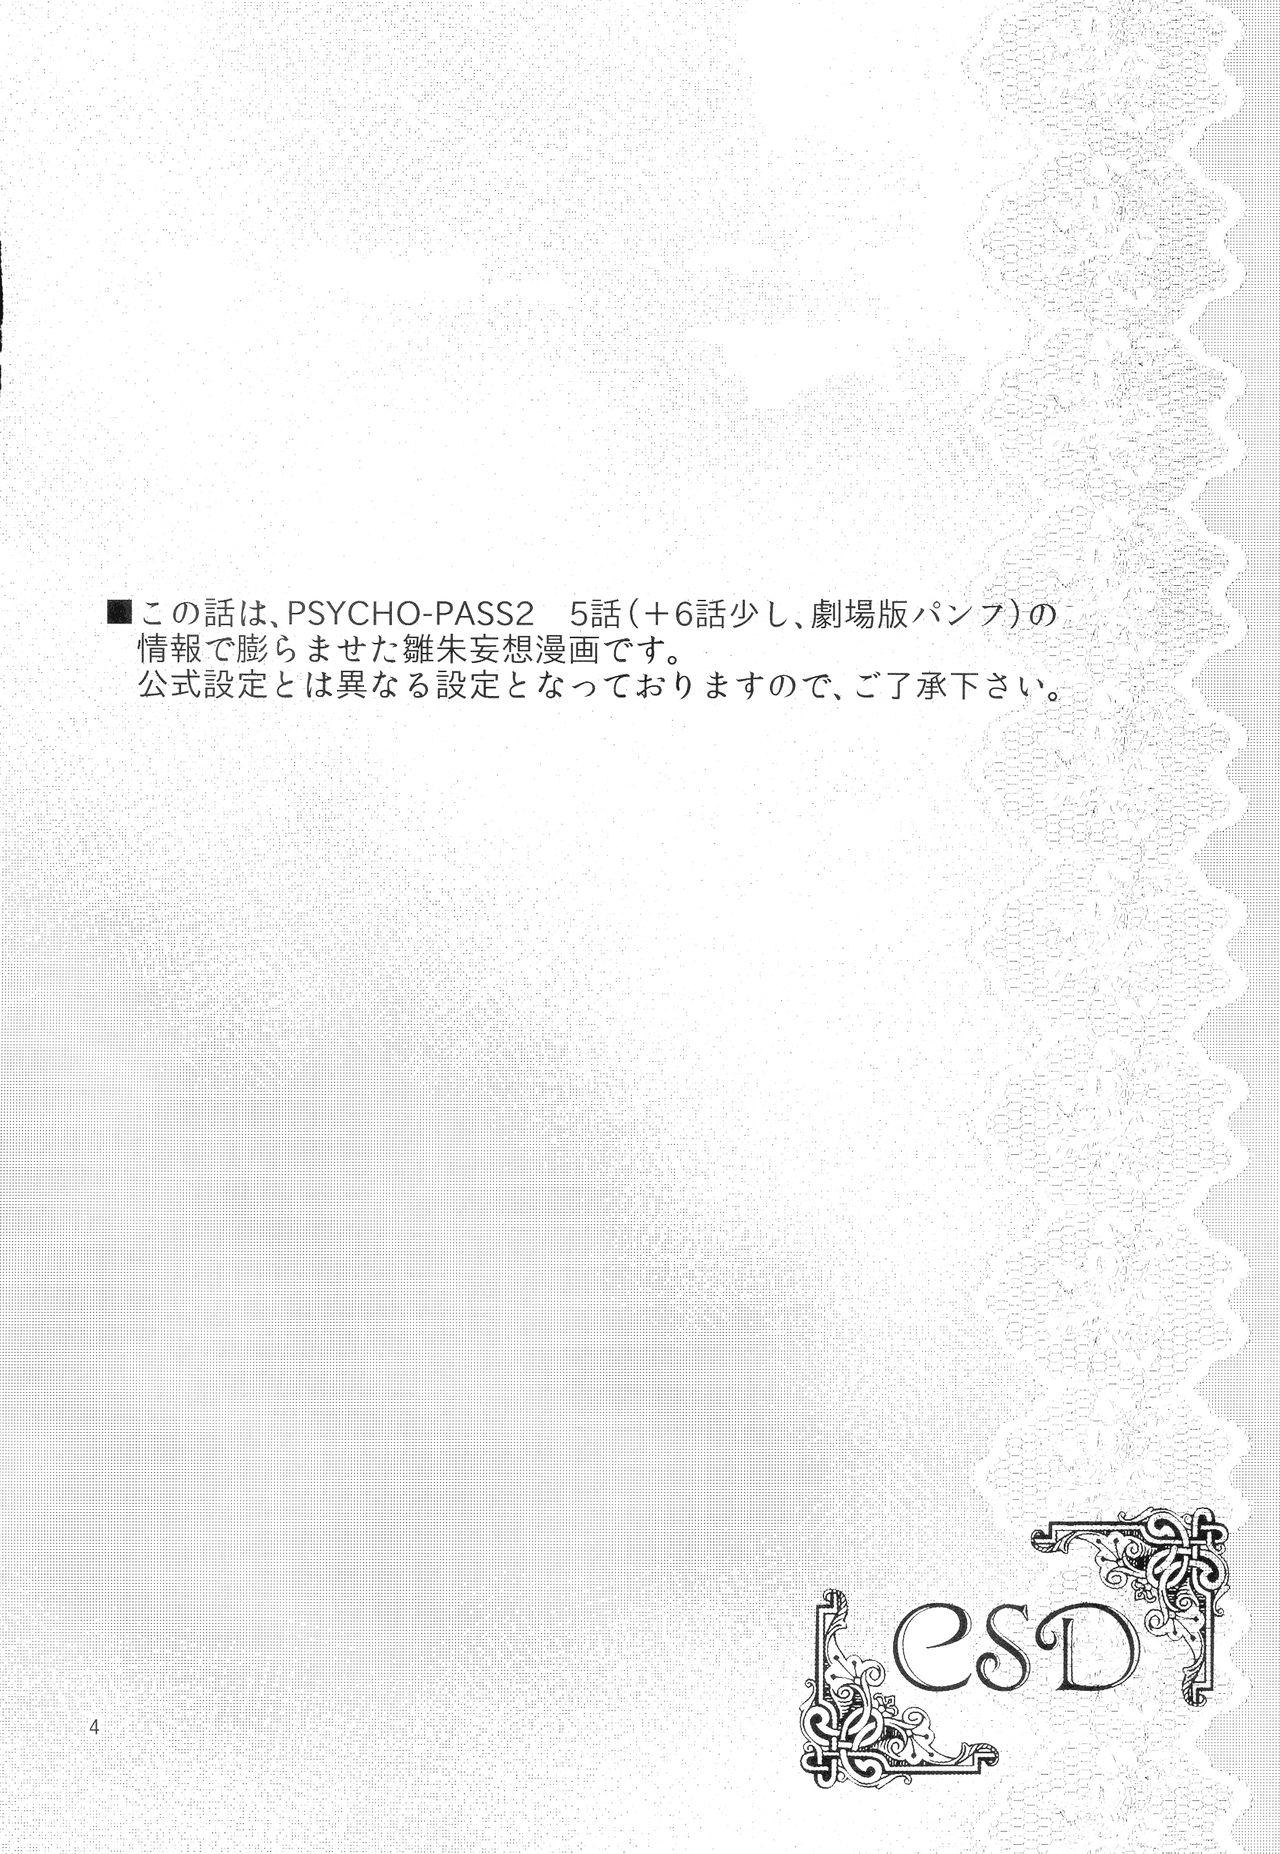 Tattoo CSD - Psycho-pass Face Fuck - Page 4